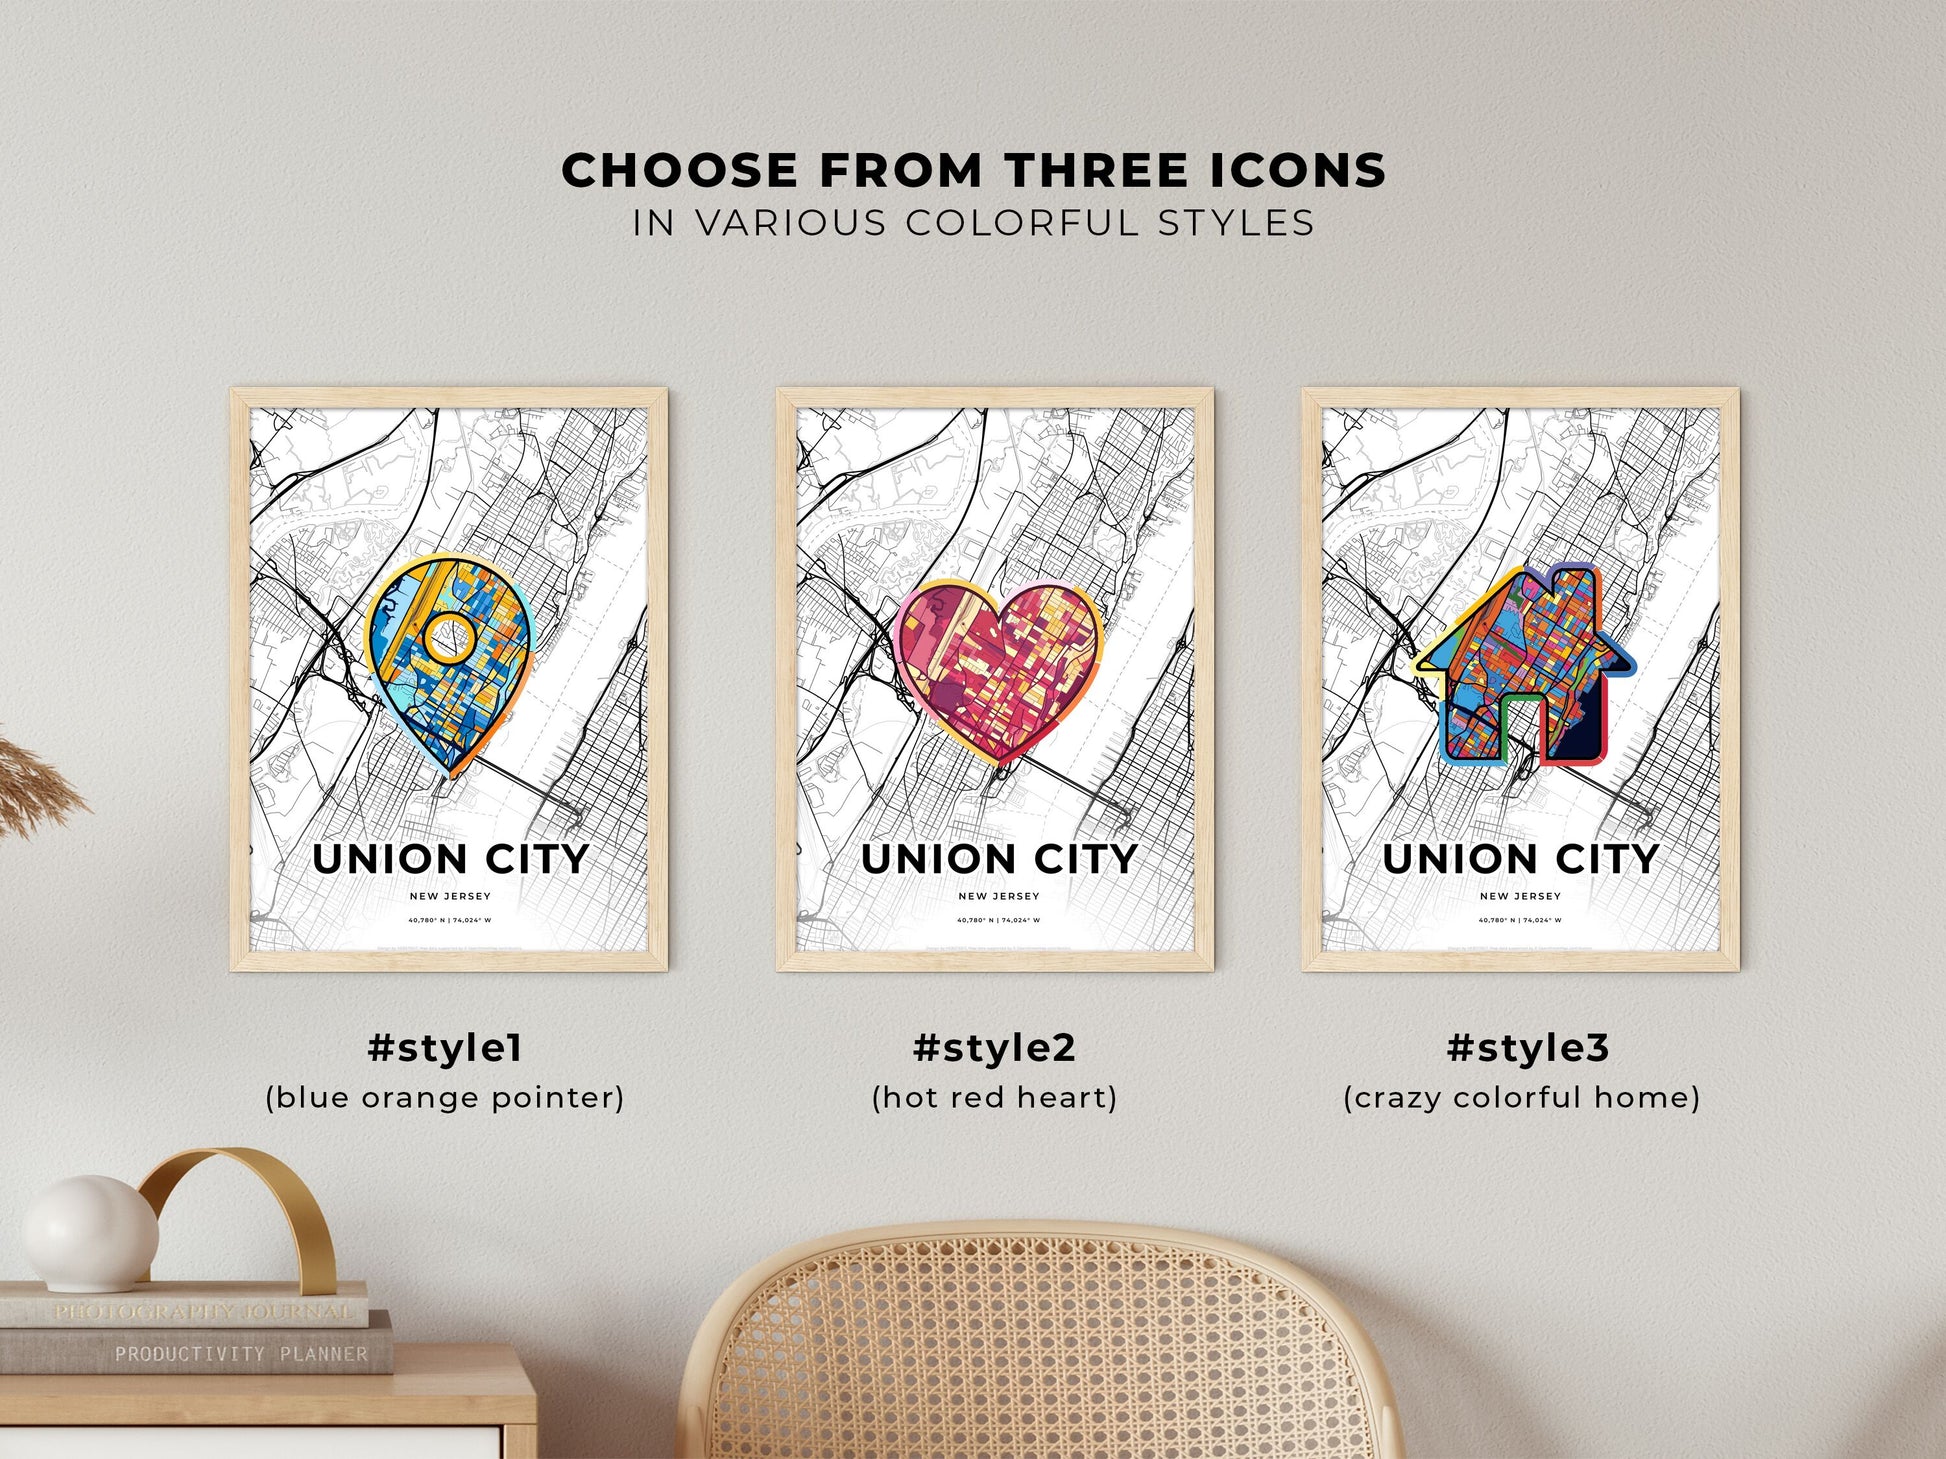 UNION CITY NEW JERSEY minimal art map with a colorful icon. Where it all began, Couple map gift.